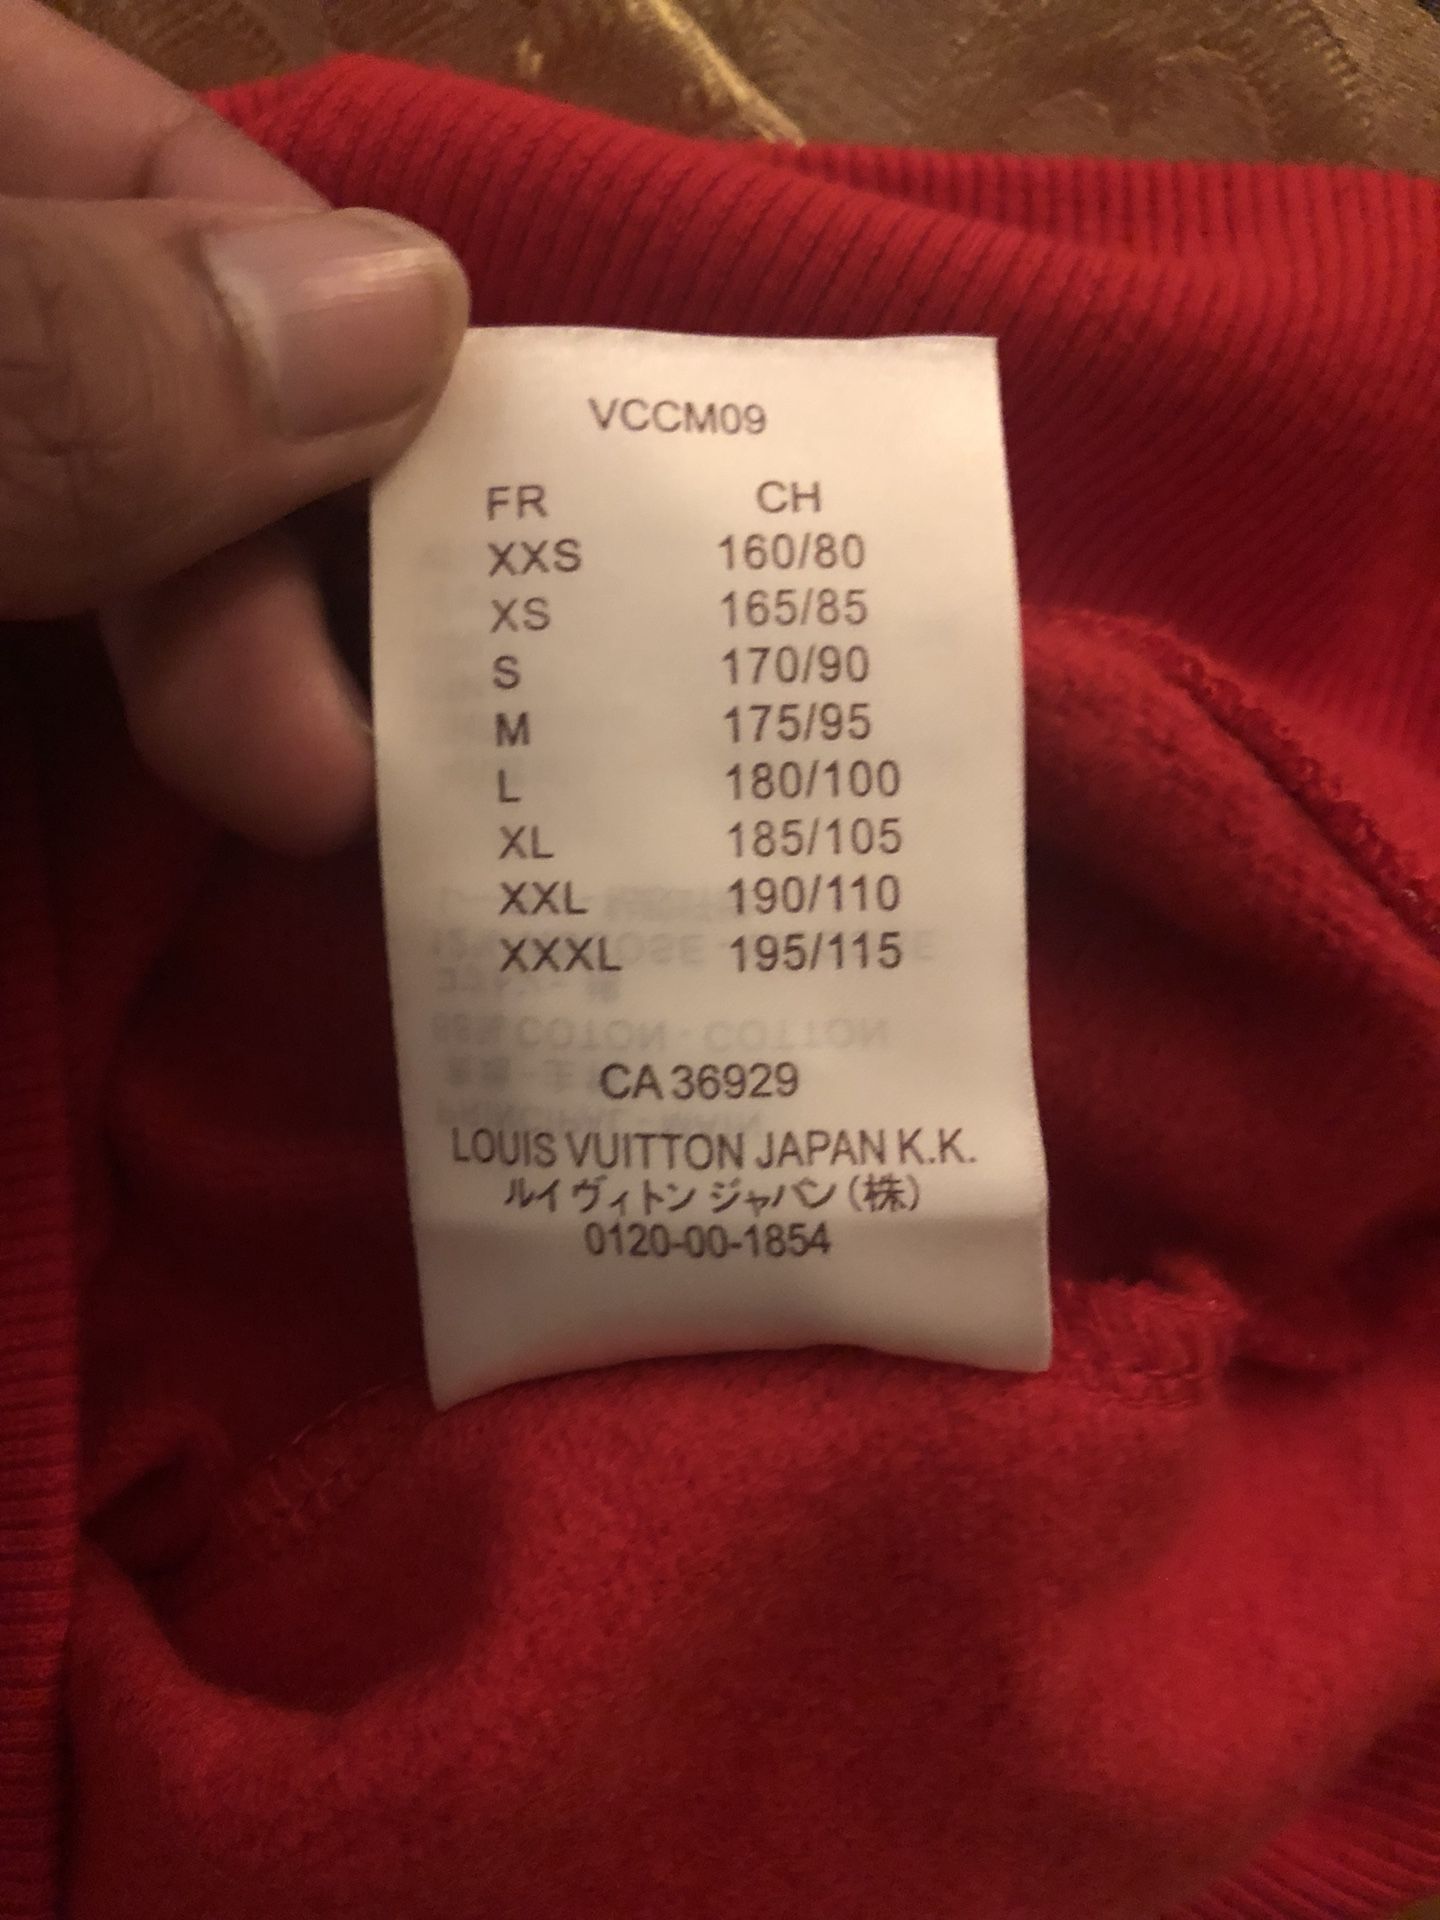 LV Louis Vuitton supreme dog hoodie for Sale in FL, US - OfferUp